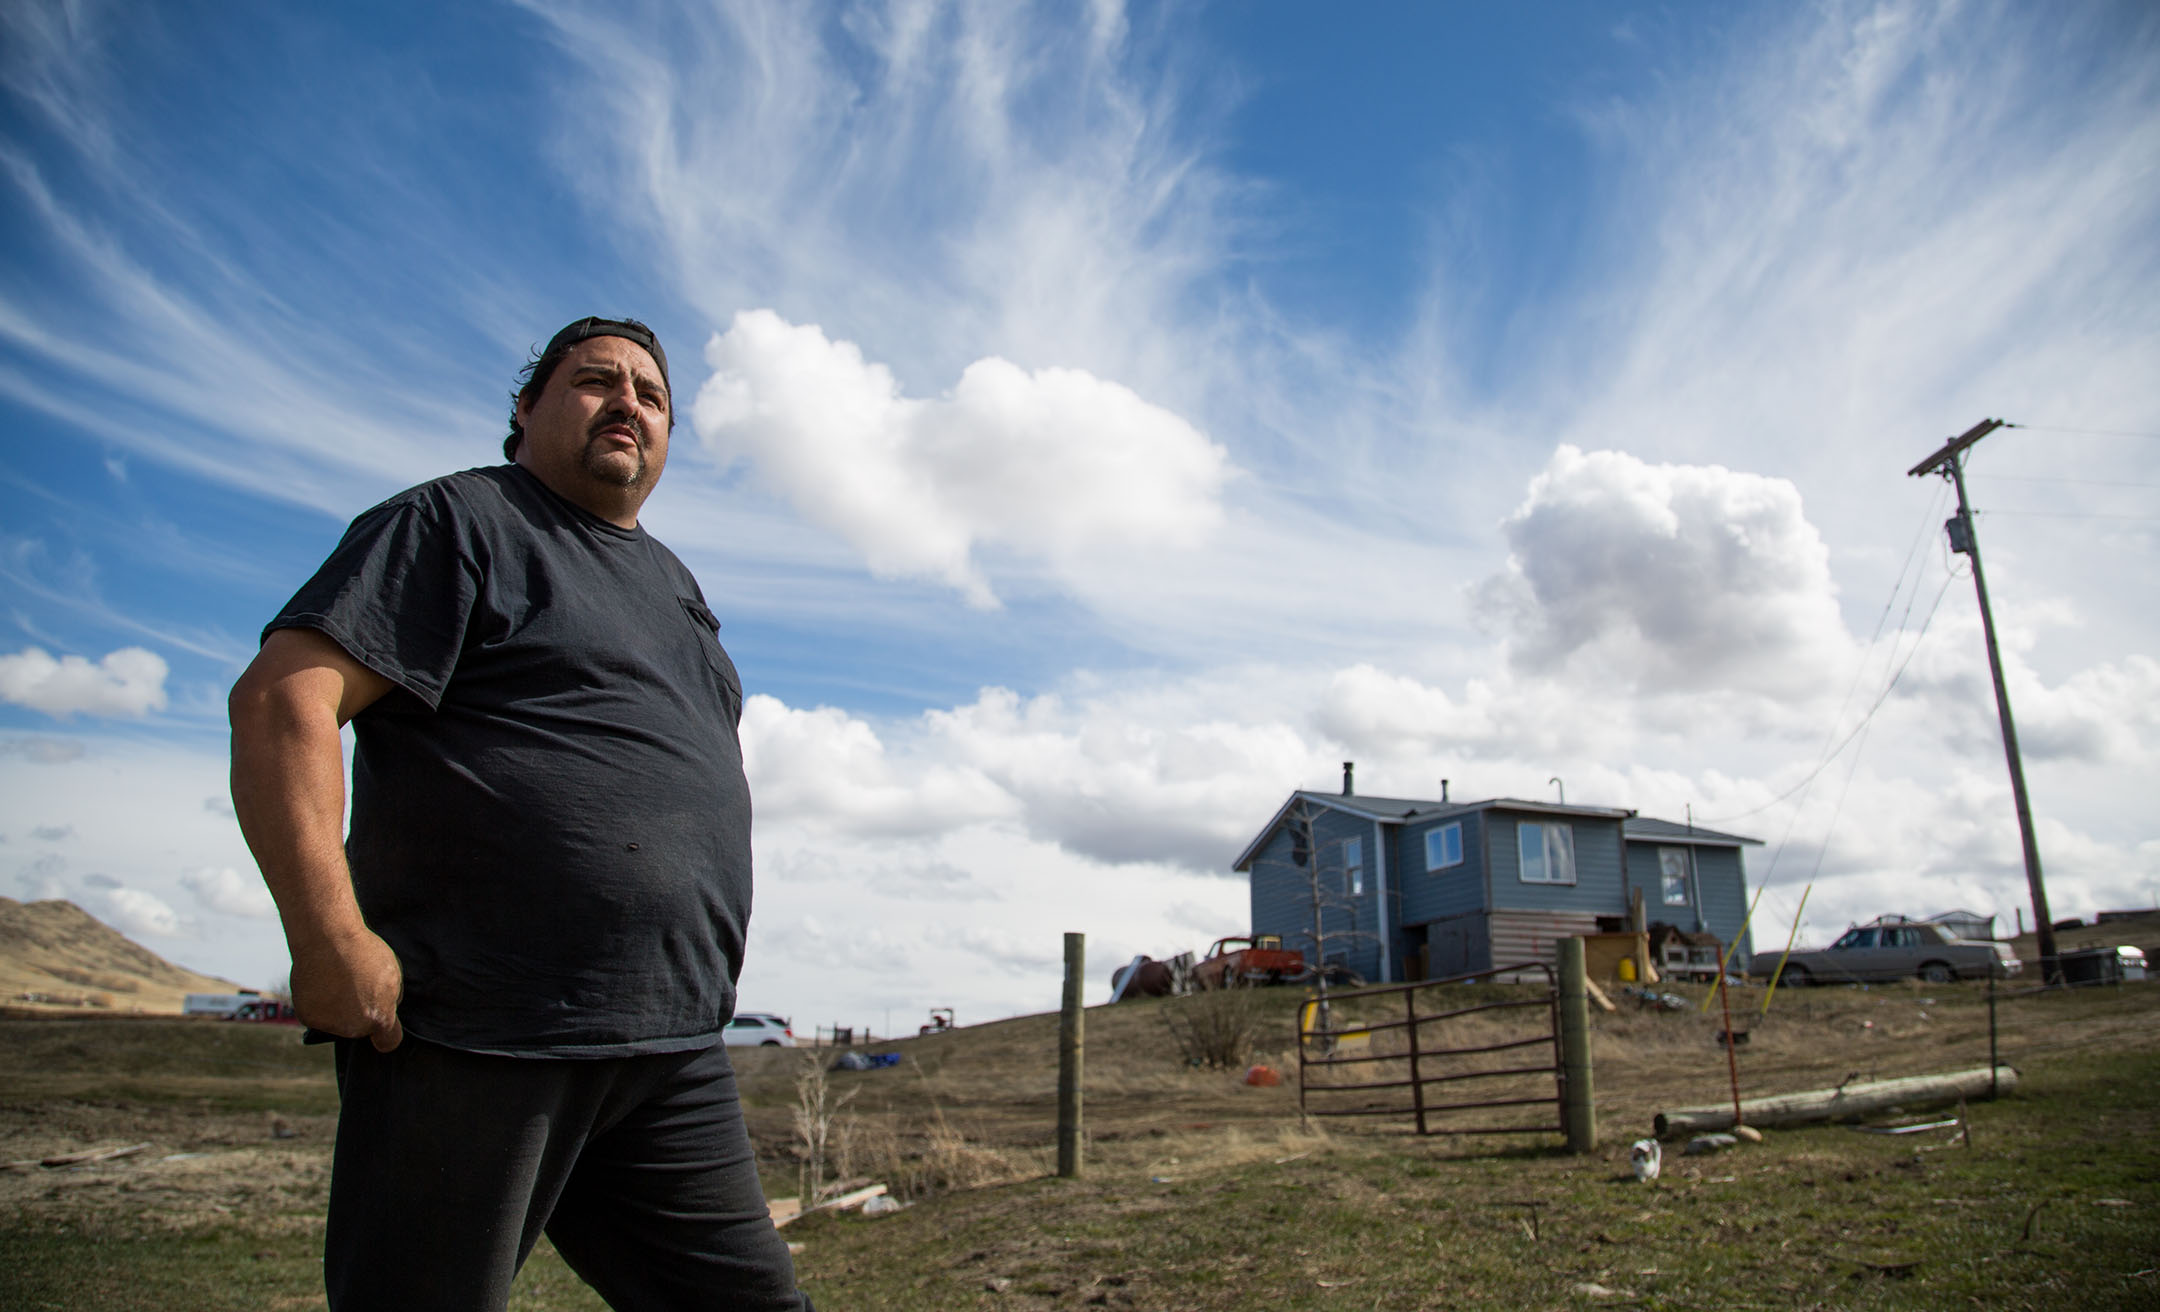 Ira Moreno is one of around 200 residents on the Rocky Boy’s reservation that have their own private well. In the past, he has looked at getting his well treated, but decided against it.